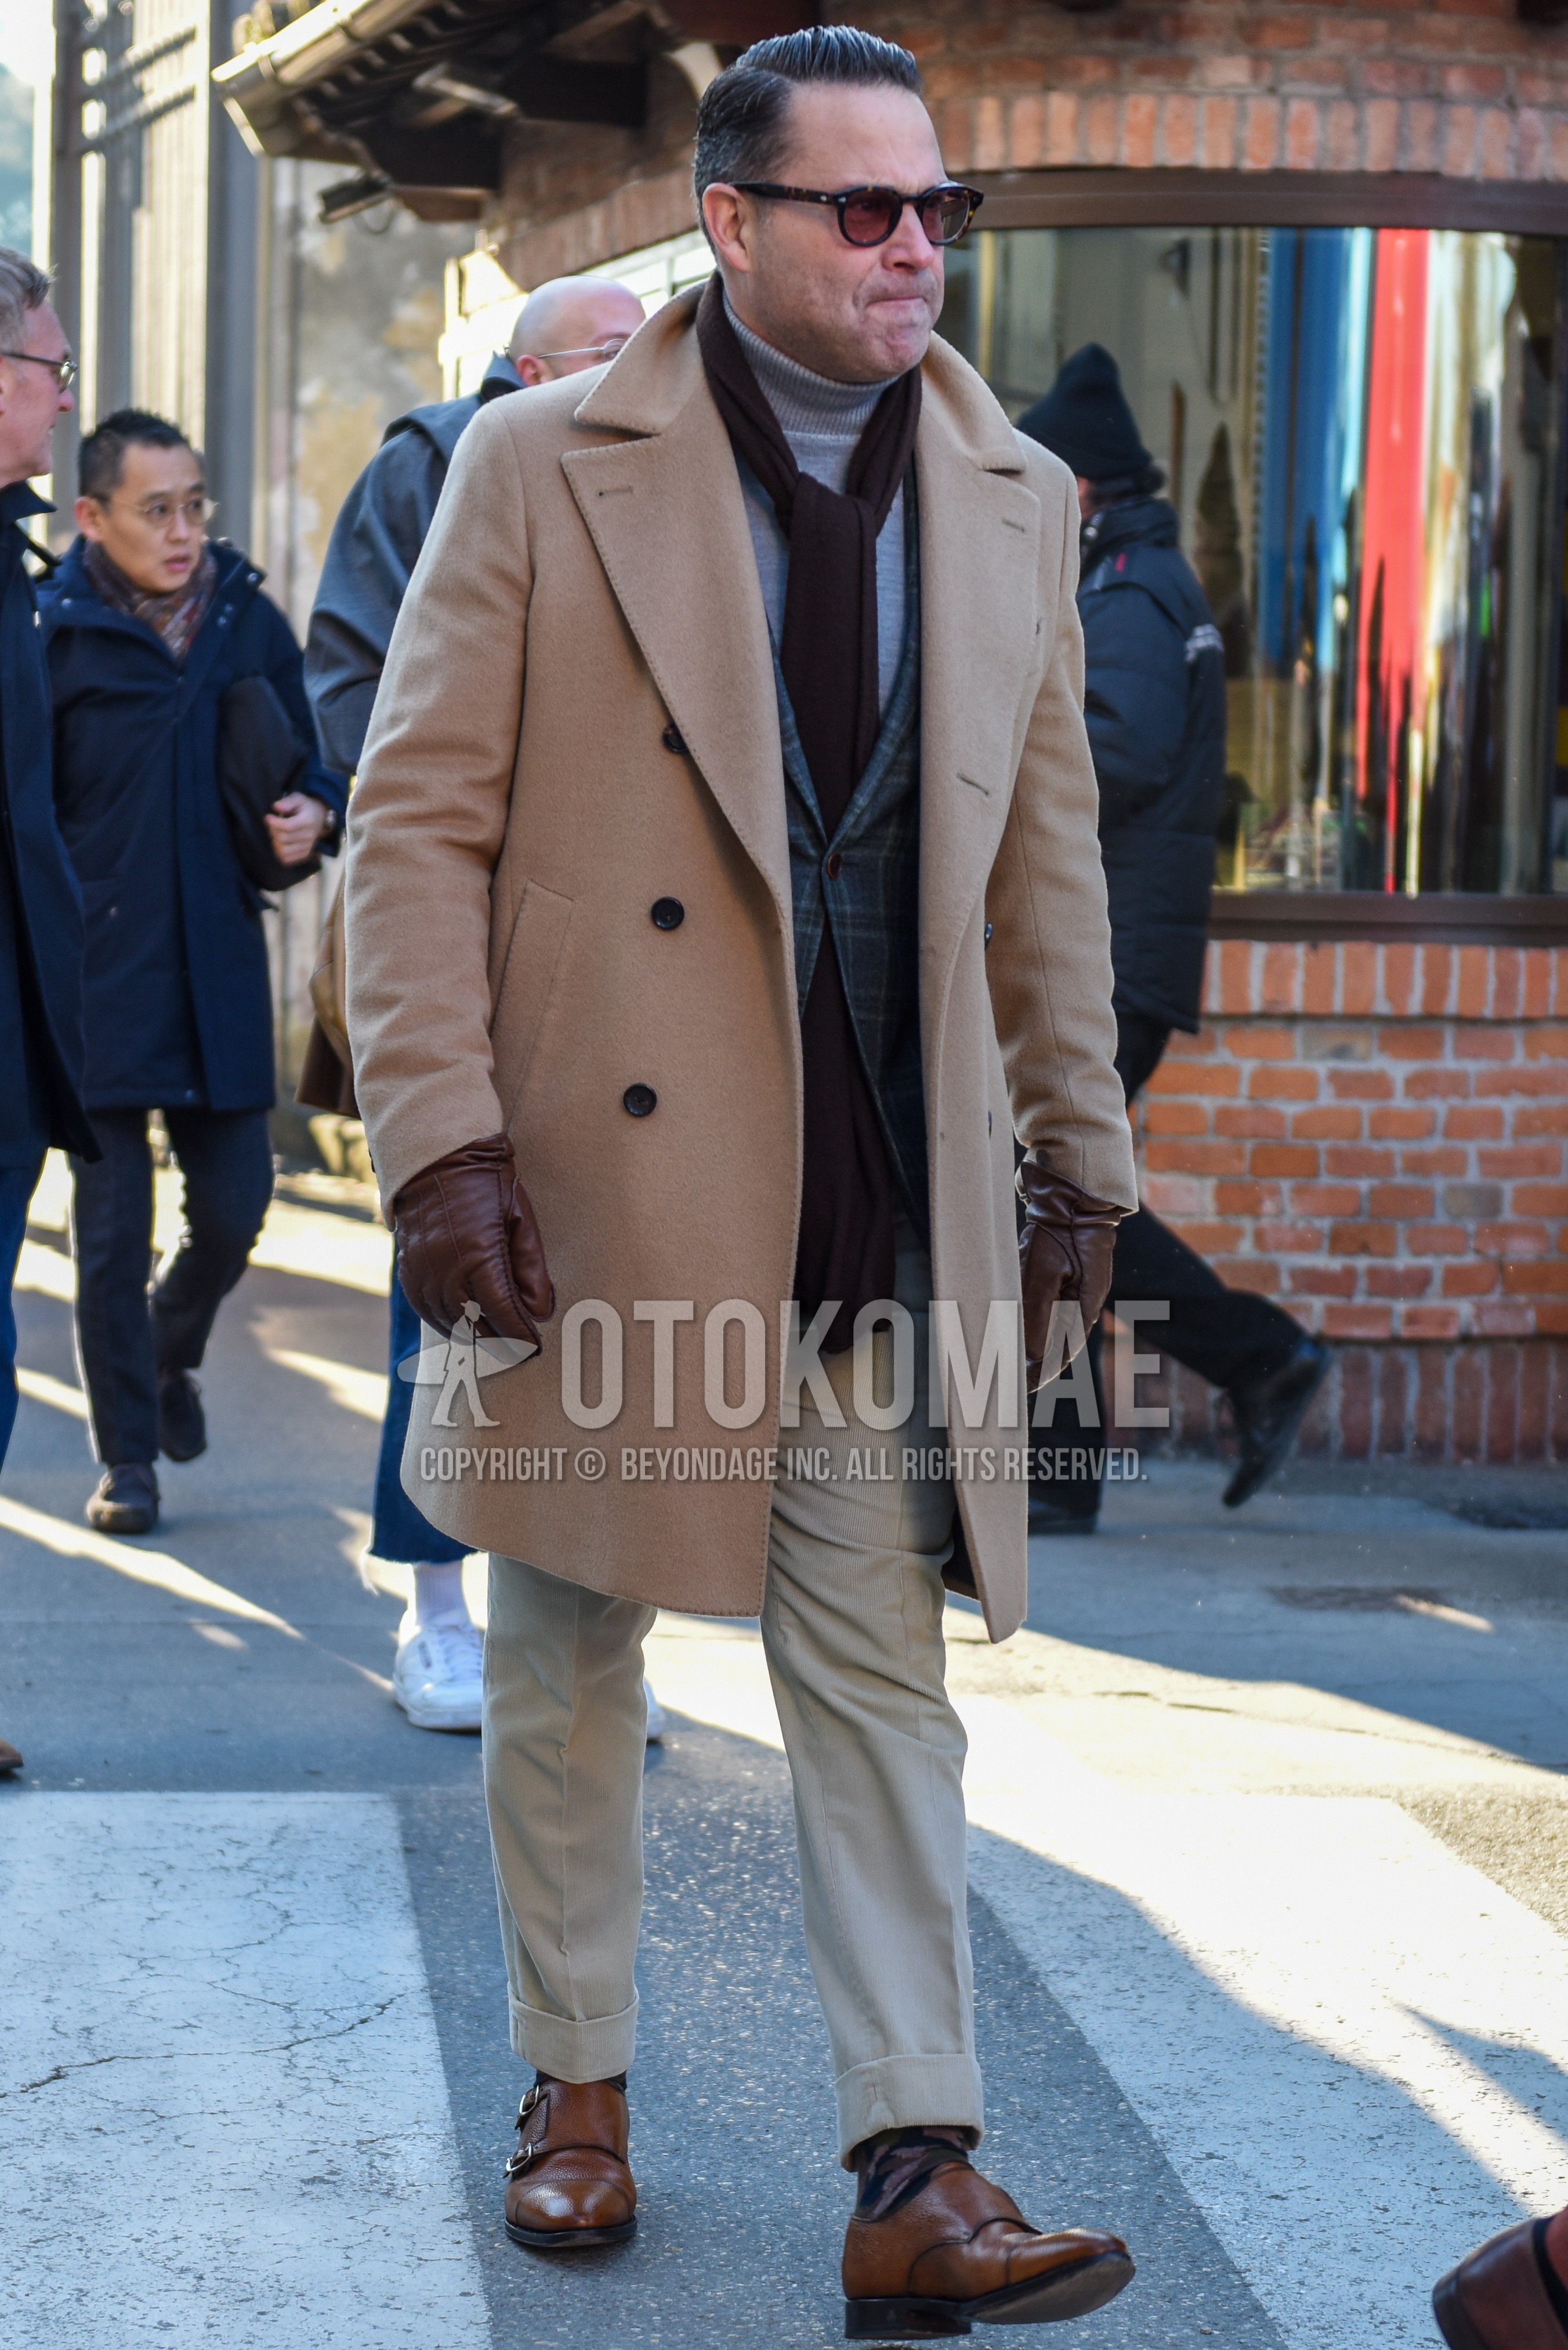 Men's autumn winter outfit with brown tortoiseshell sunglasses, brown plain scarf, beige plain chester coat, gray check tailored jacket, gray plain turtleneck knit, beige plain chinos, multi-color socks socks, brown monk shoes leather shoes.